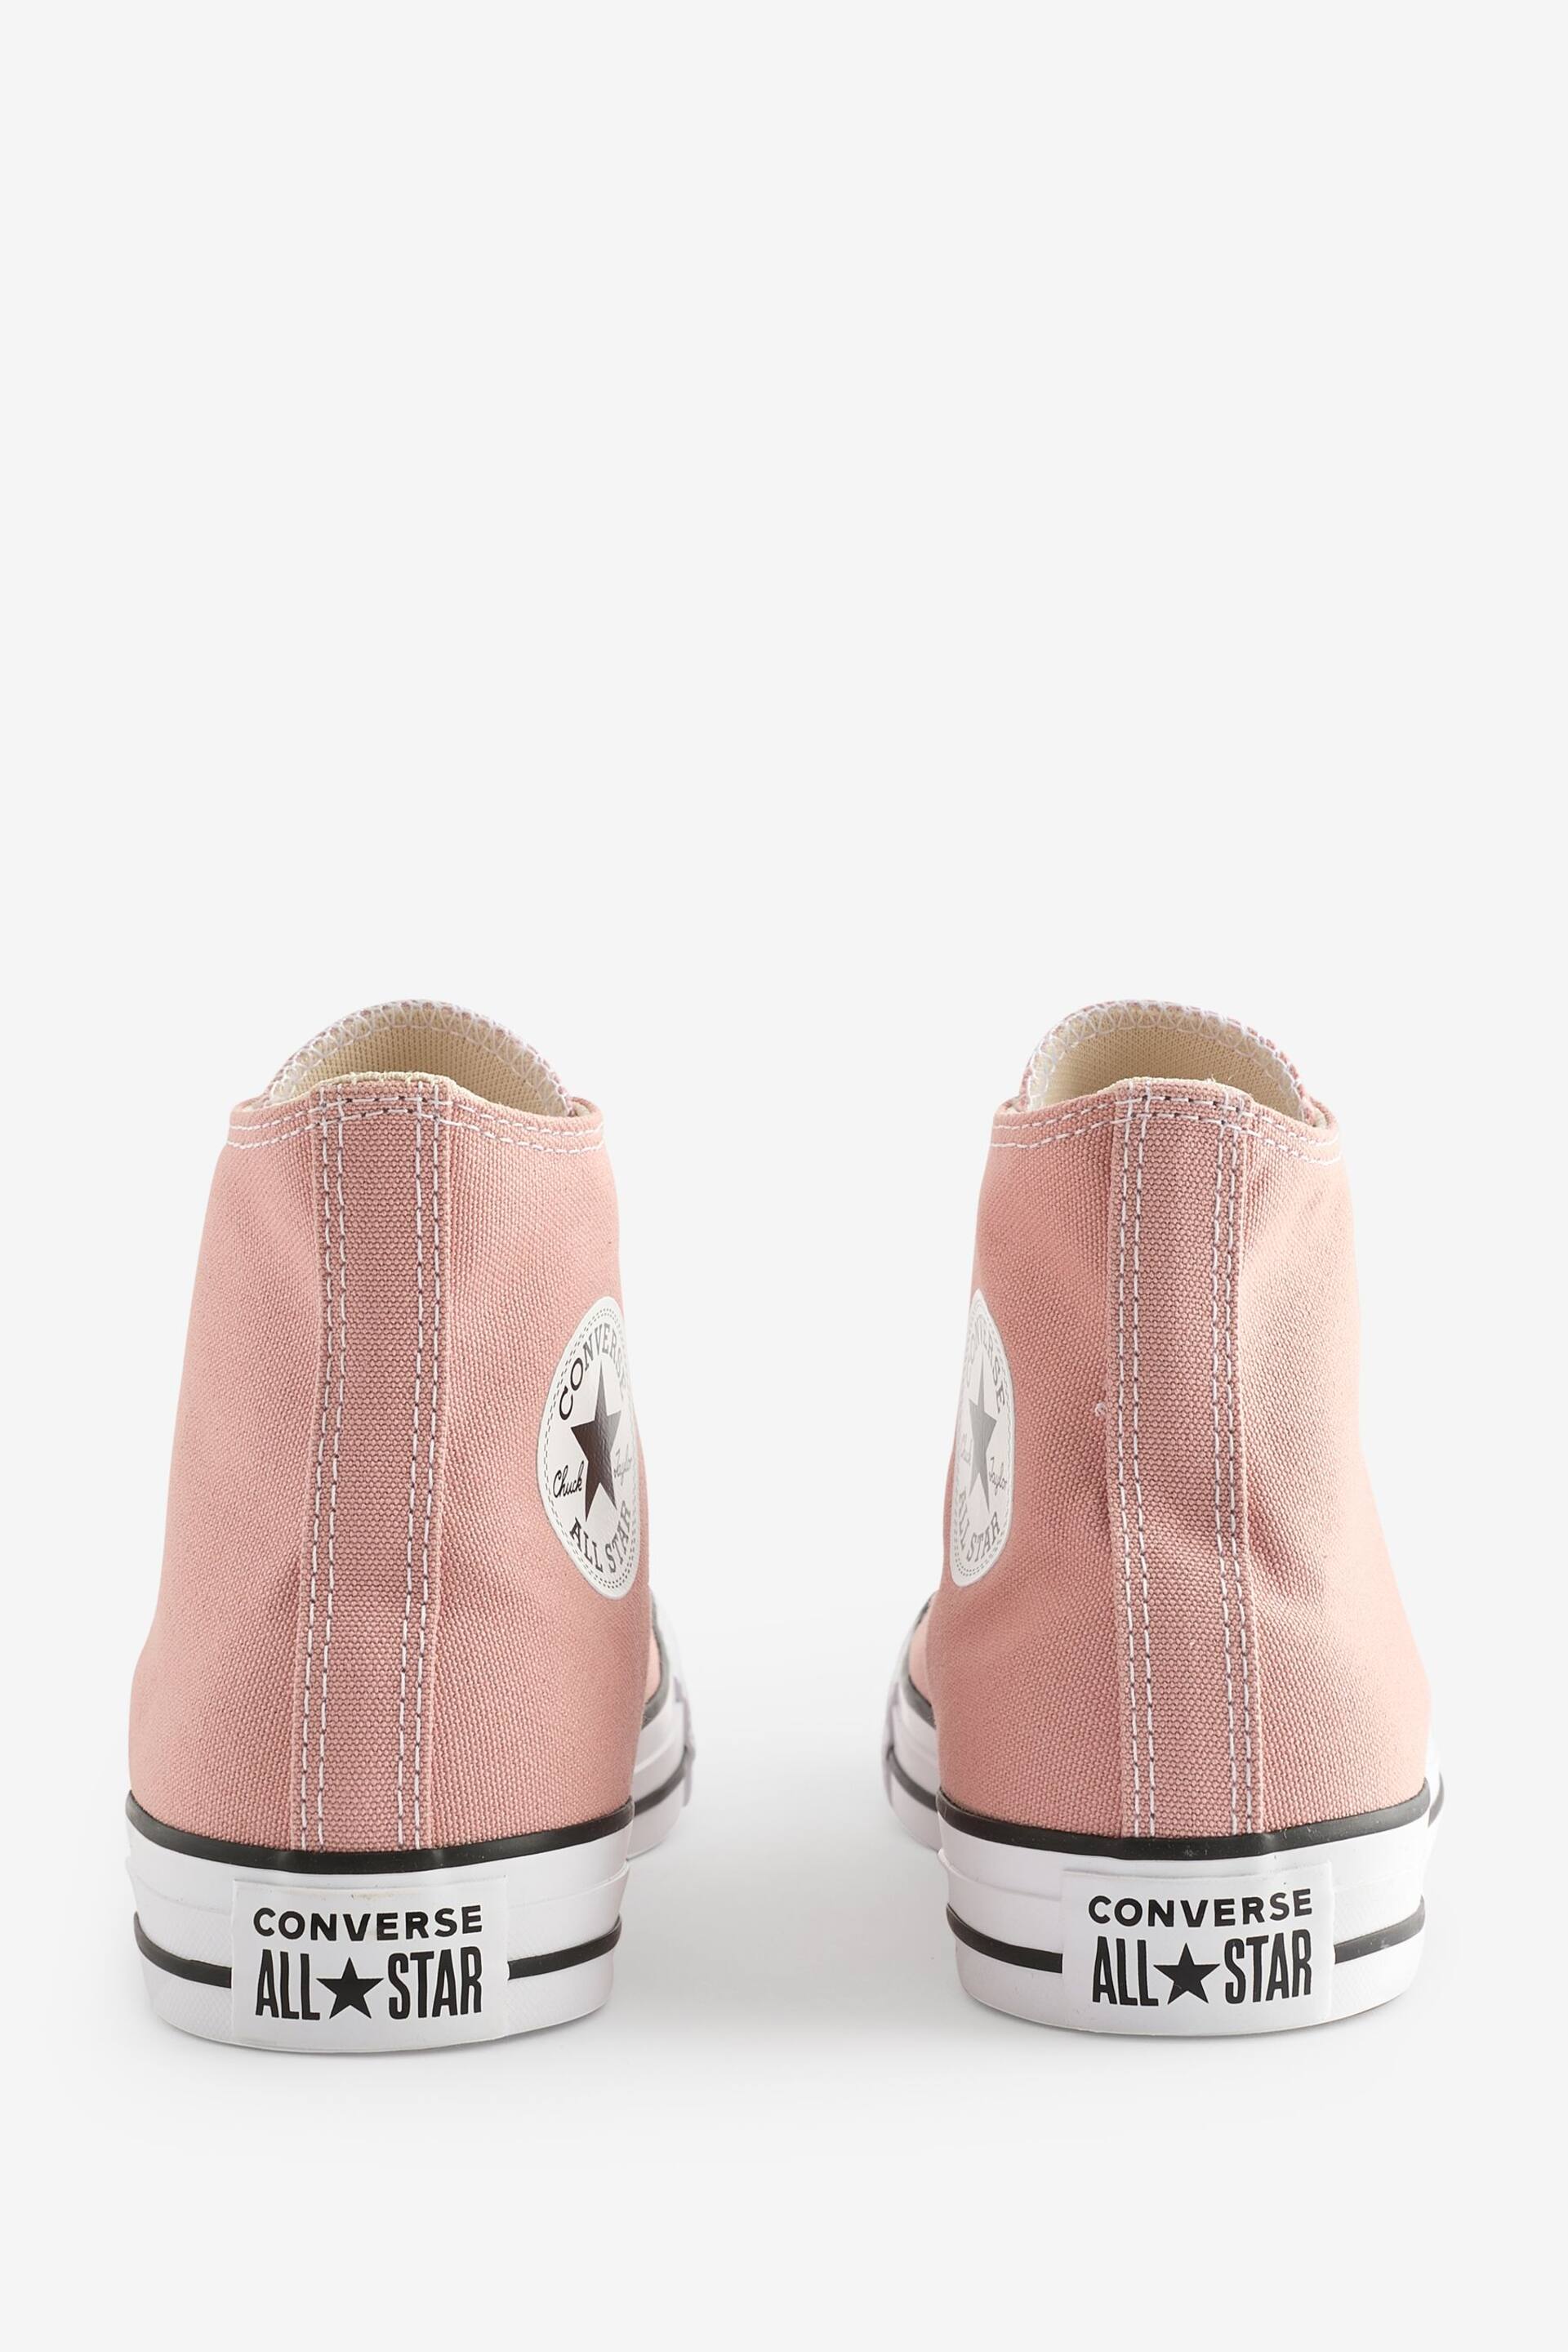 Converse Light Pink Chuck Taylor All Star High Trainers - Image 5 of 9